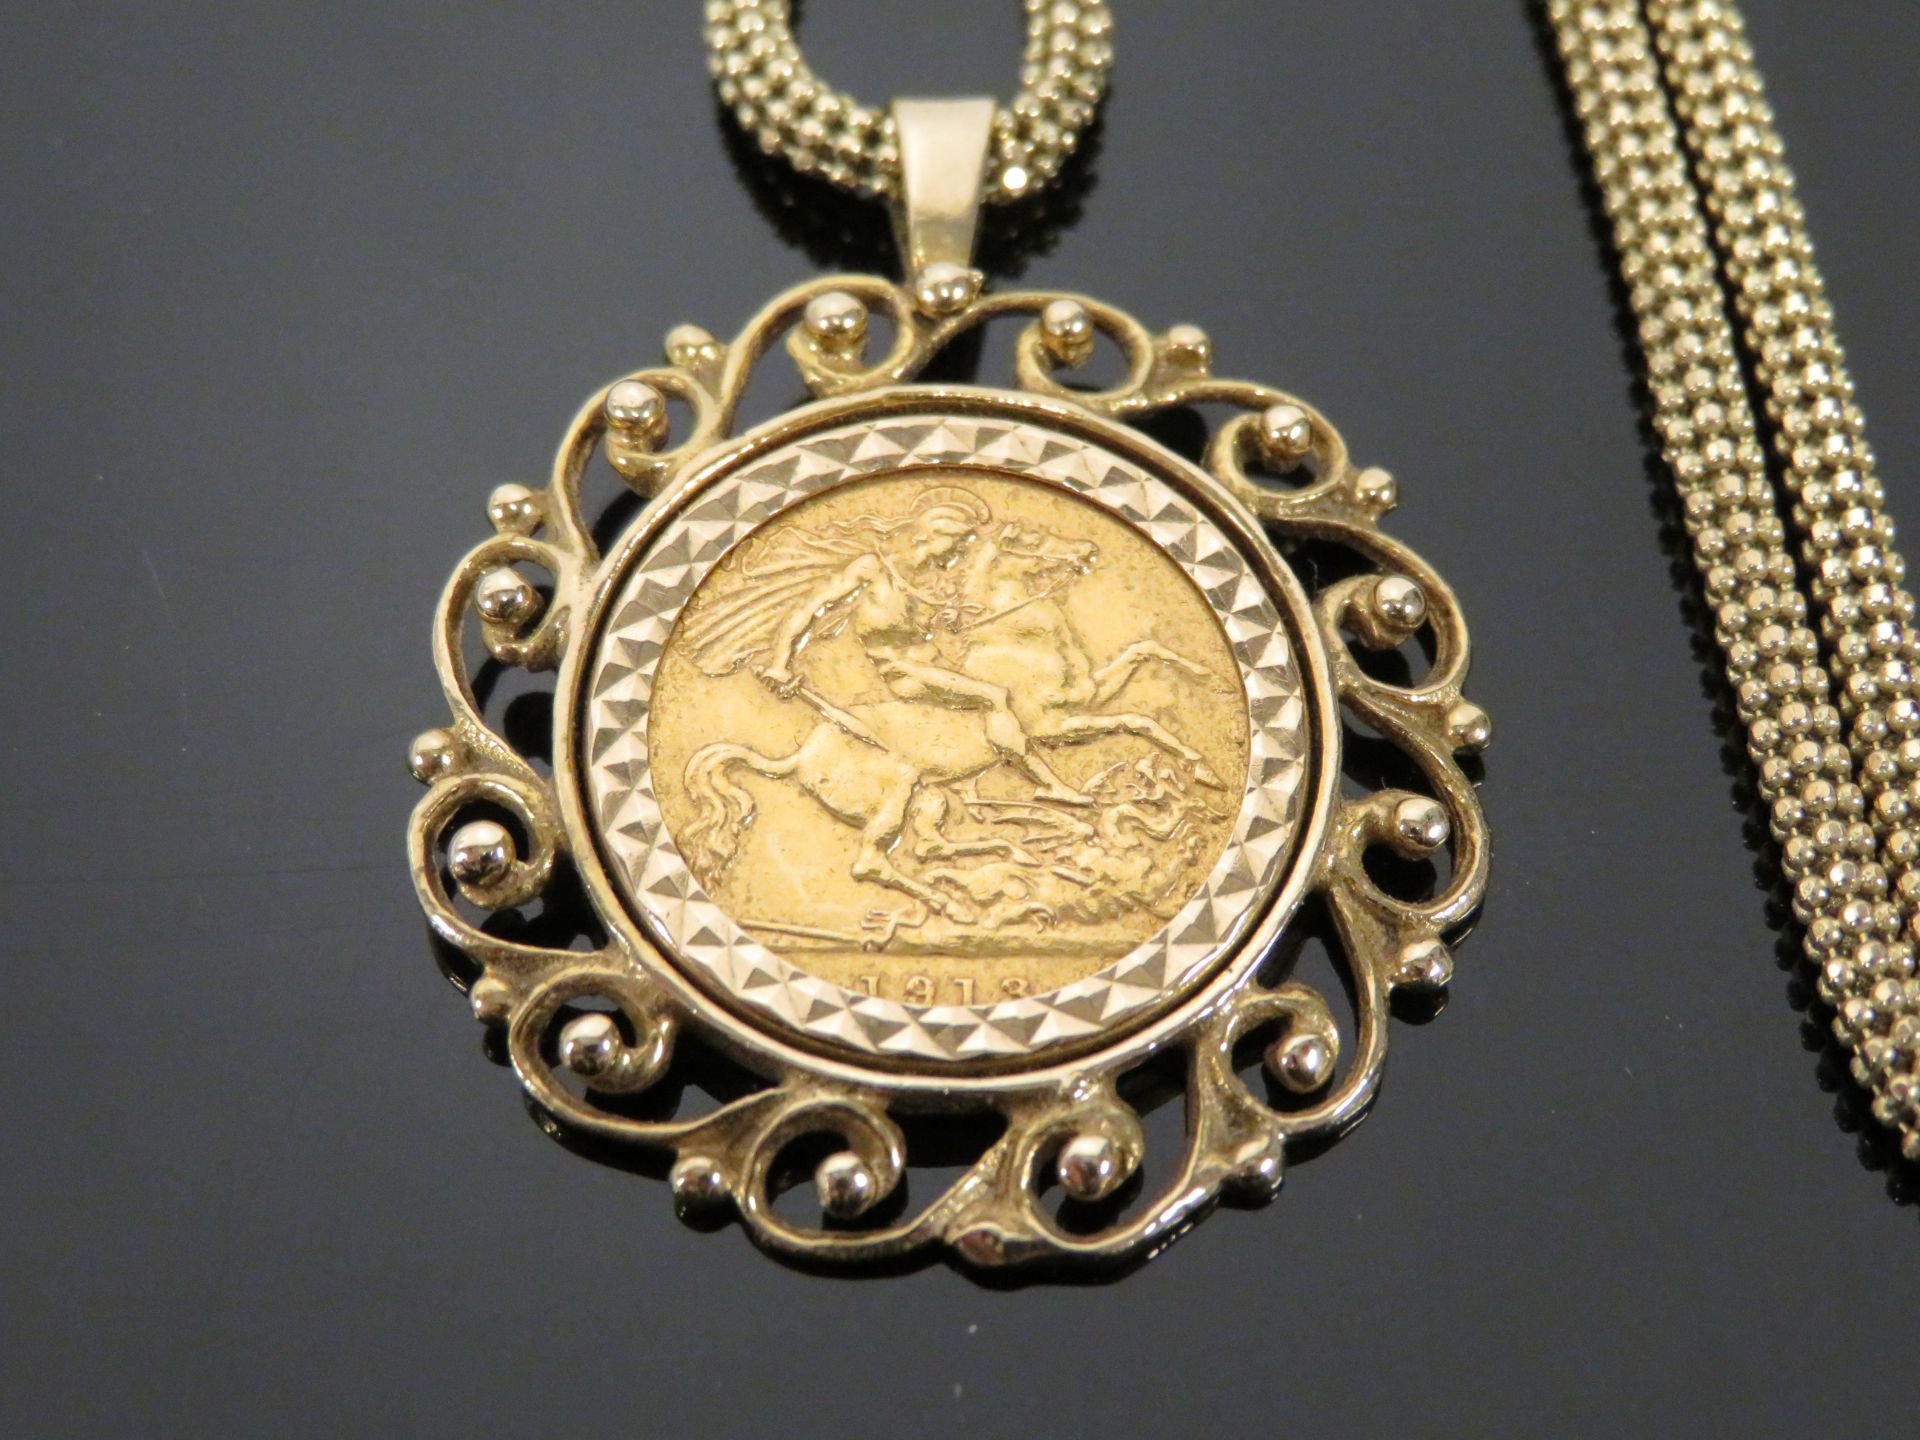 1913 Half Sovereign mounted on gold chain - Image 2 of 5